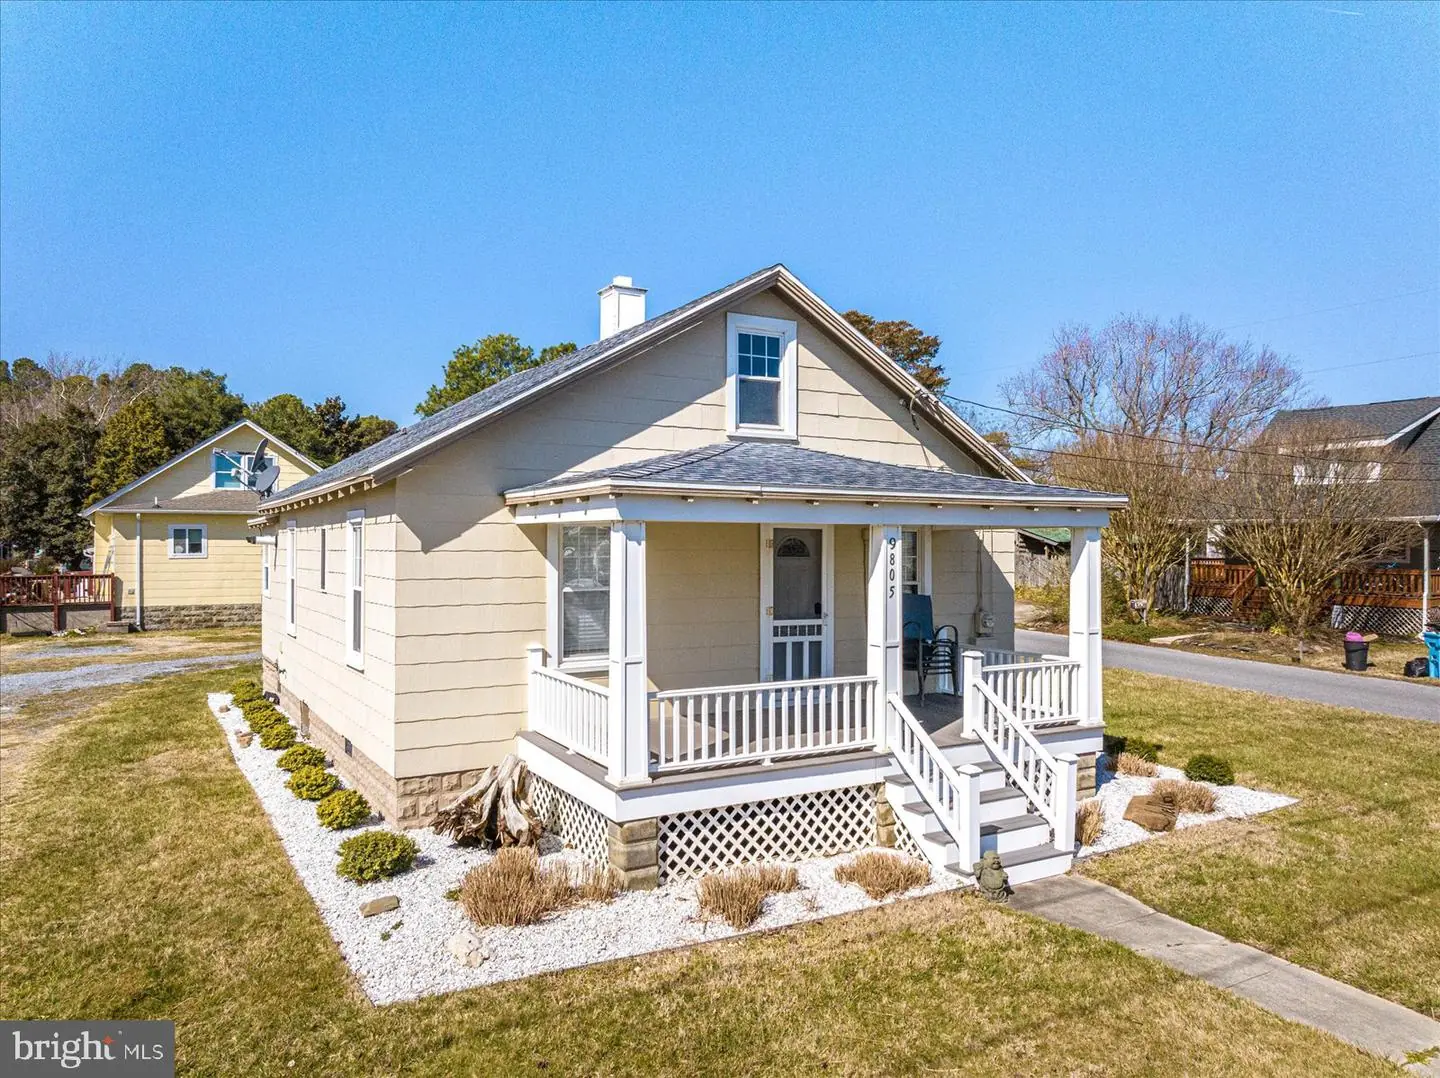 MDWO2019446-802902745874-2024-03-07-00-08-03 9801 / 9805 Golf Course Rd | Ocean City, MD Real Estate For Sale | MLS# Mdwo2019446  - 1st Choice Properties